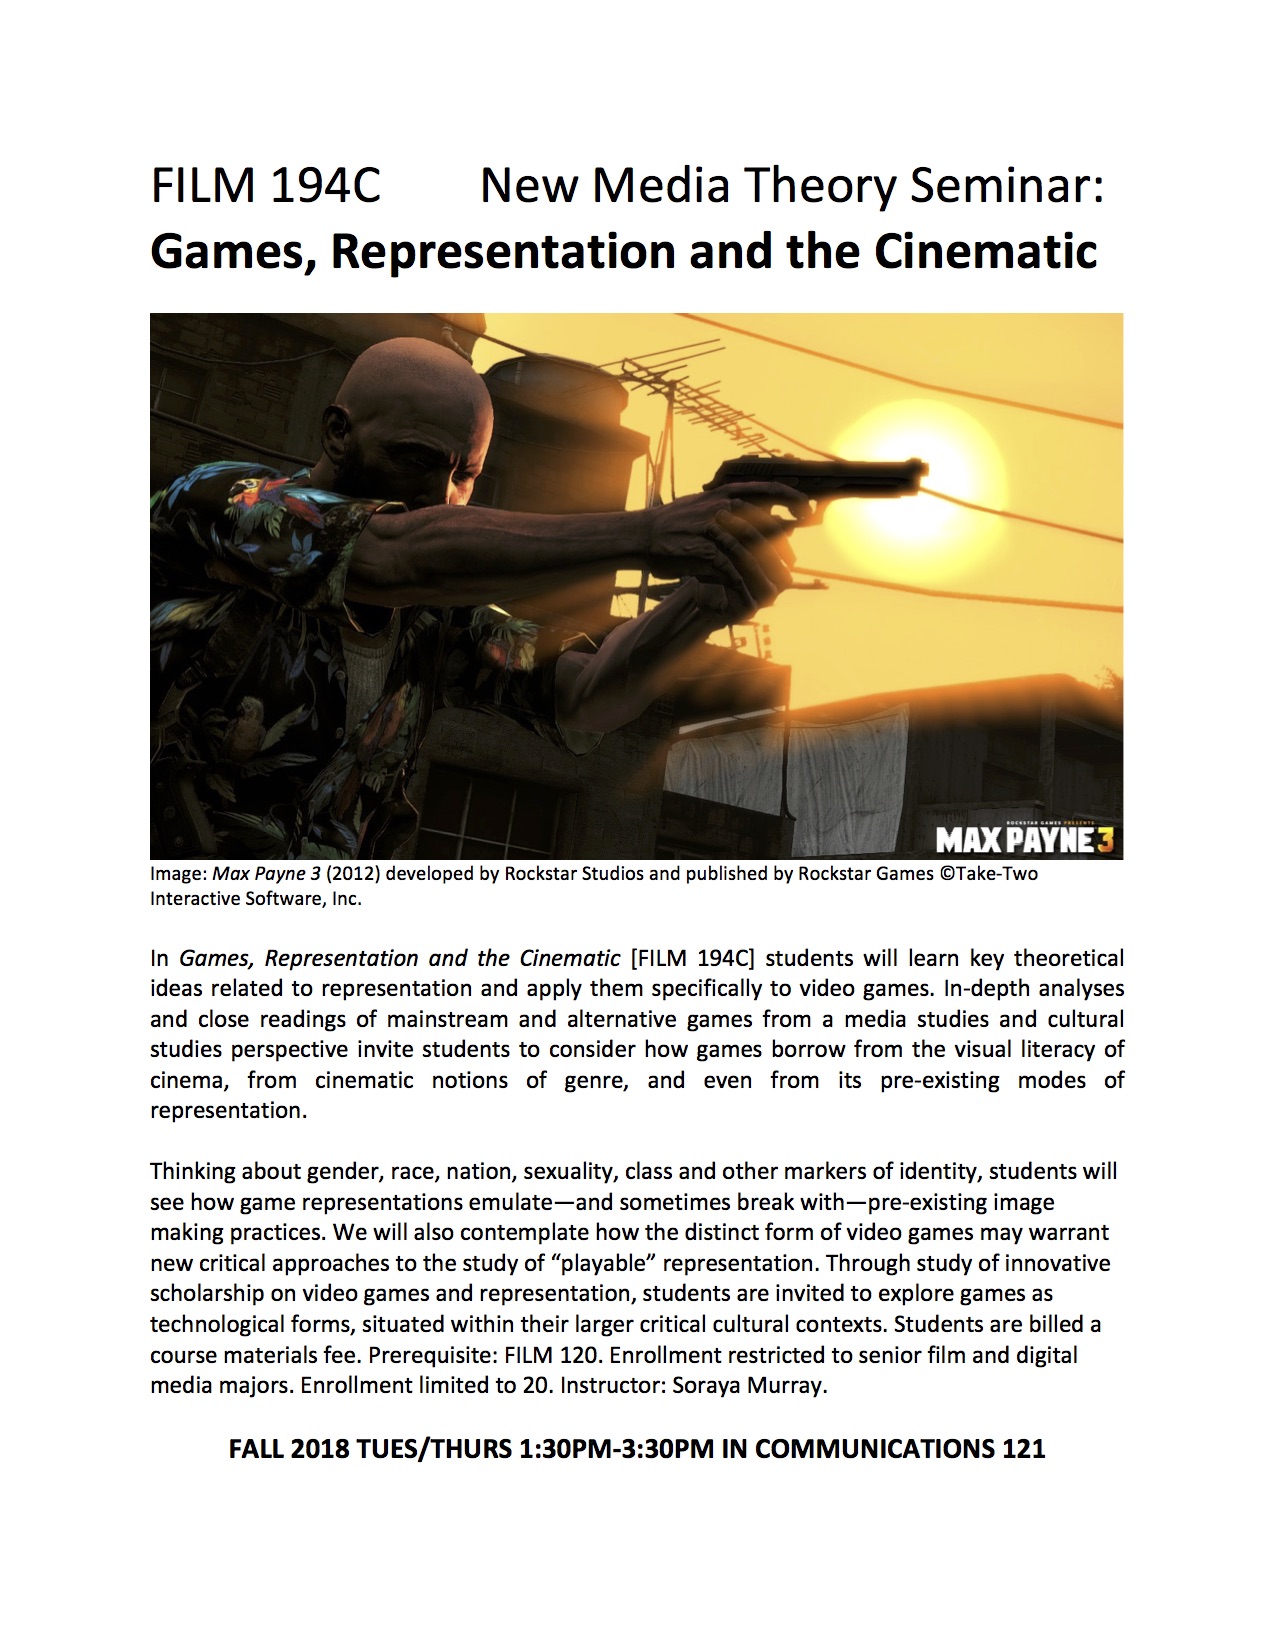 course flyer for FILM 194C New Media Seminar Games Representation and the Cinematic